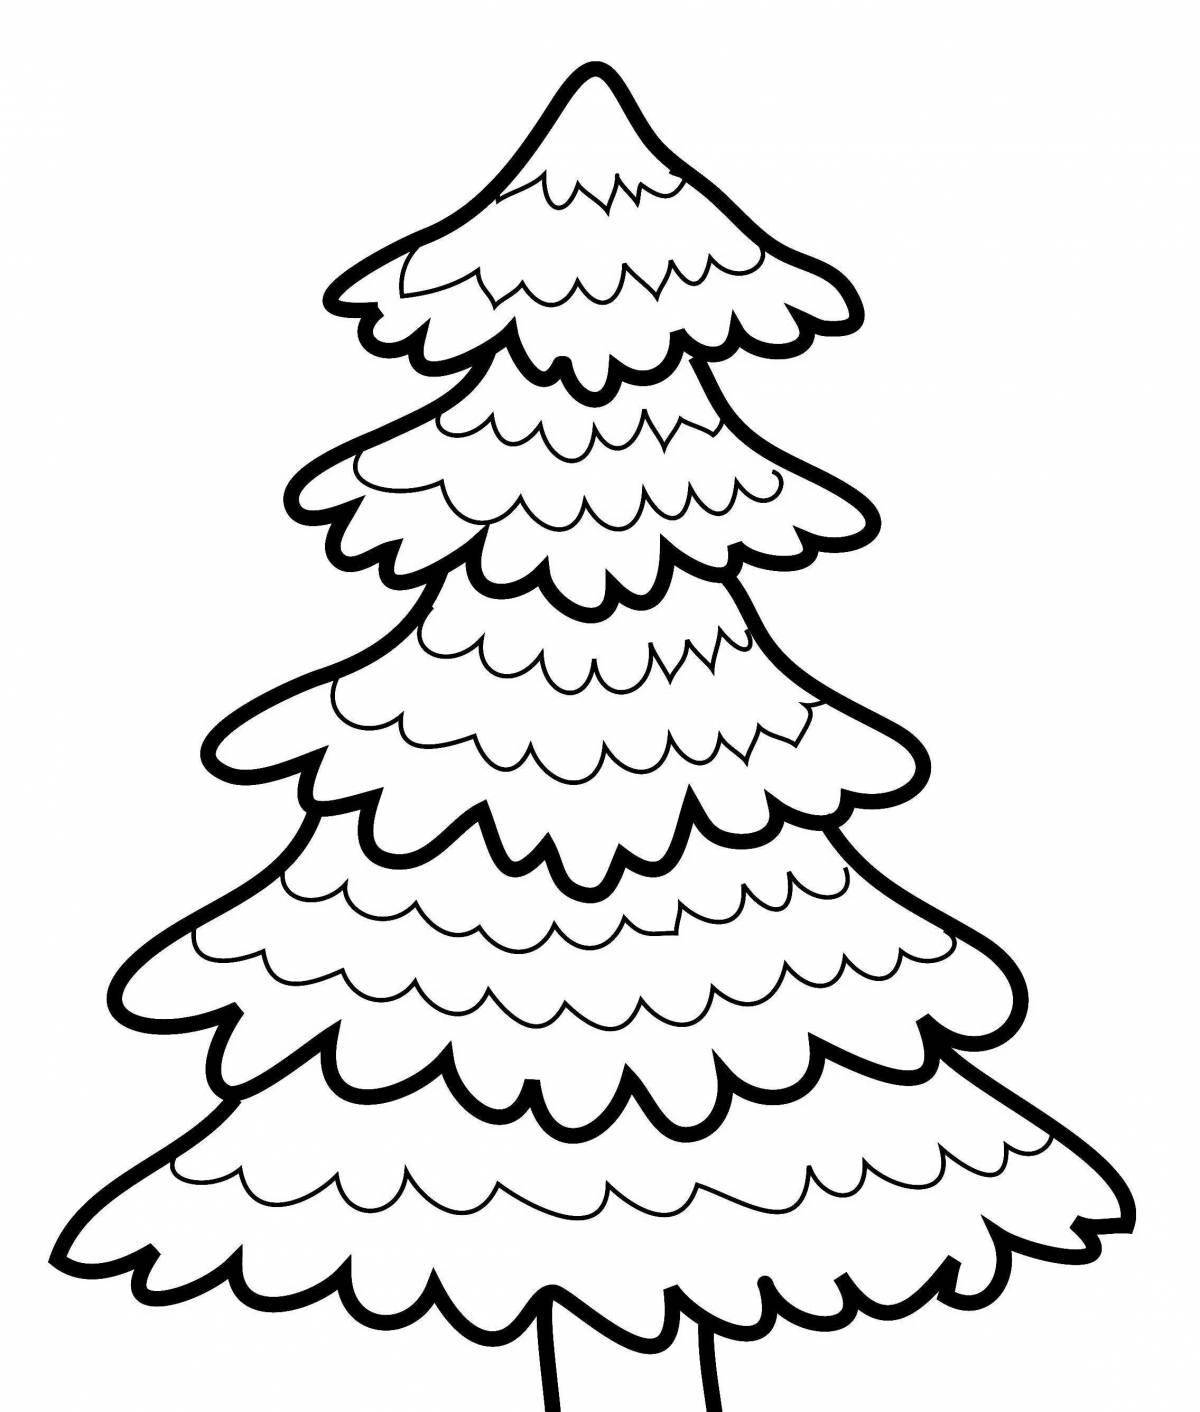 Festive Christmas tree coloring book for 3-4 year olds